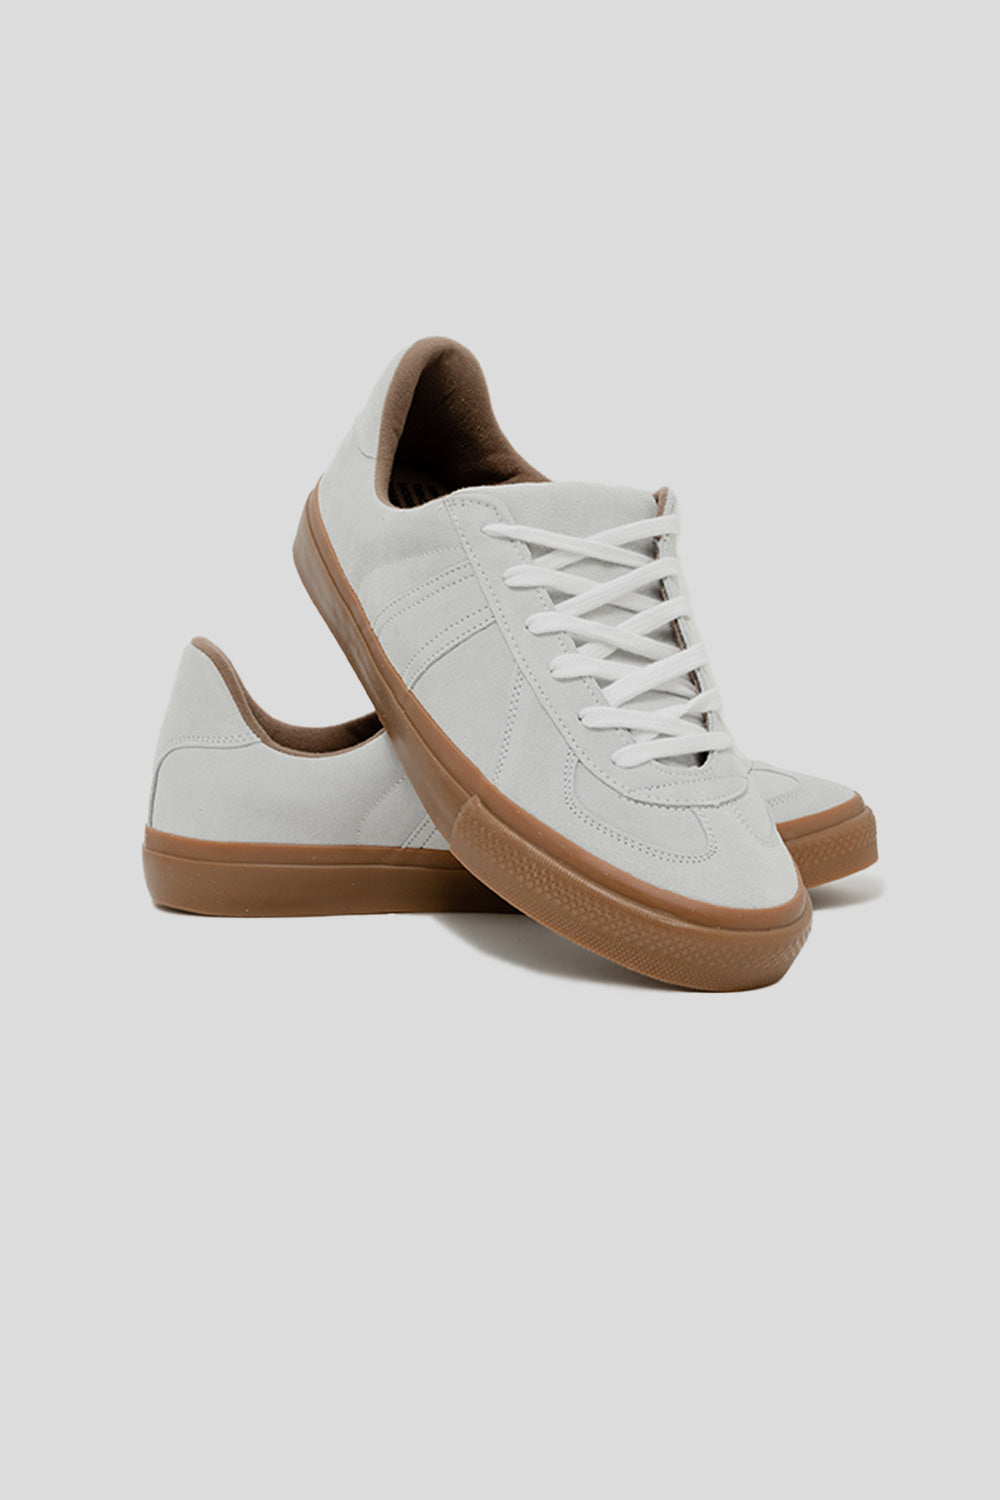 Reproduction of Found German Military Trainer Skateboarding Shoe in White Suede